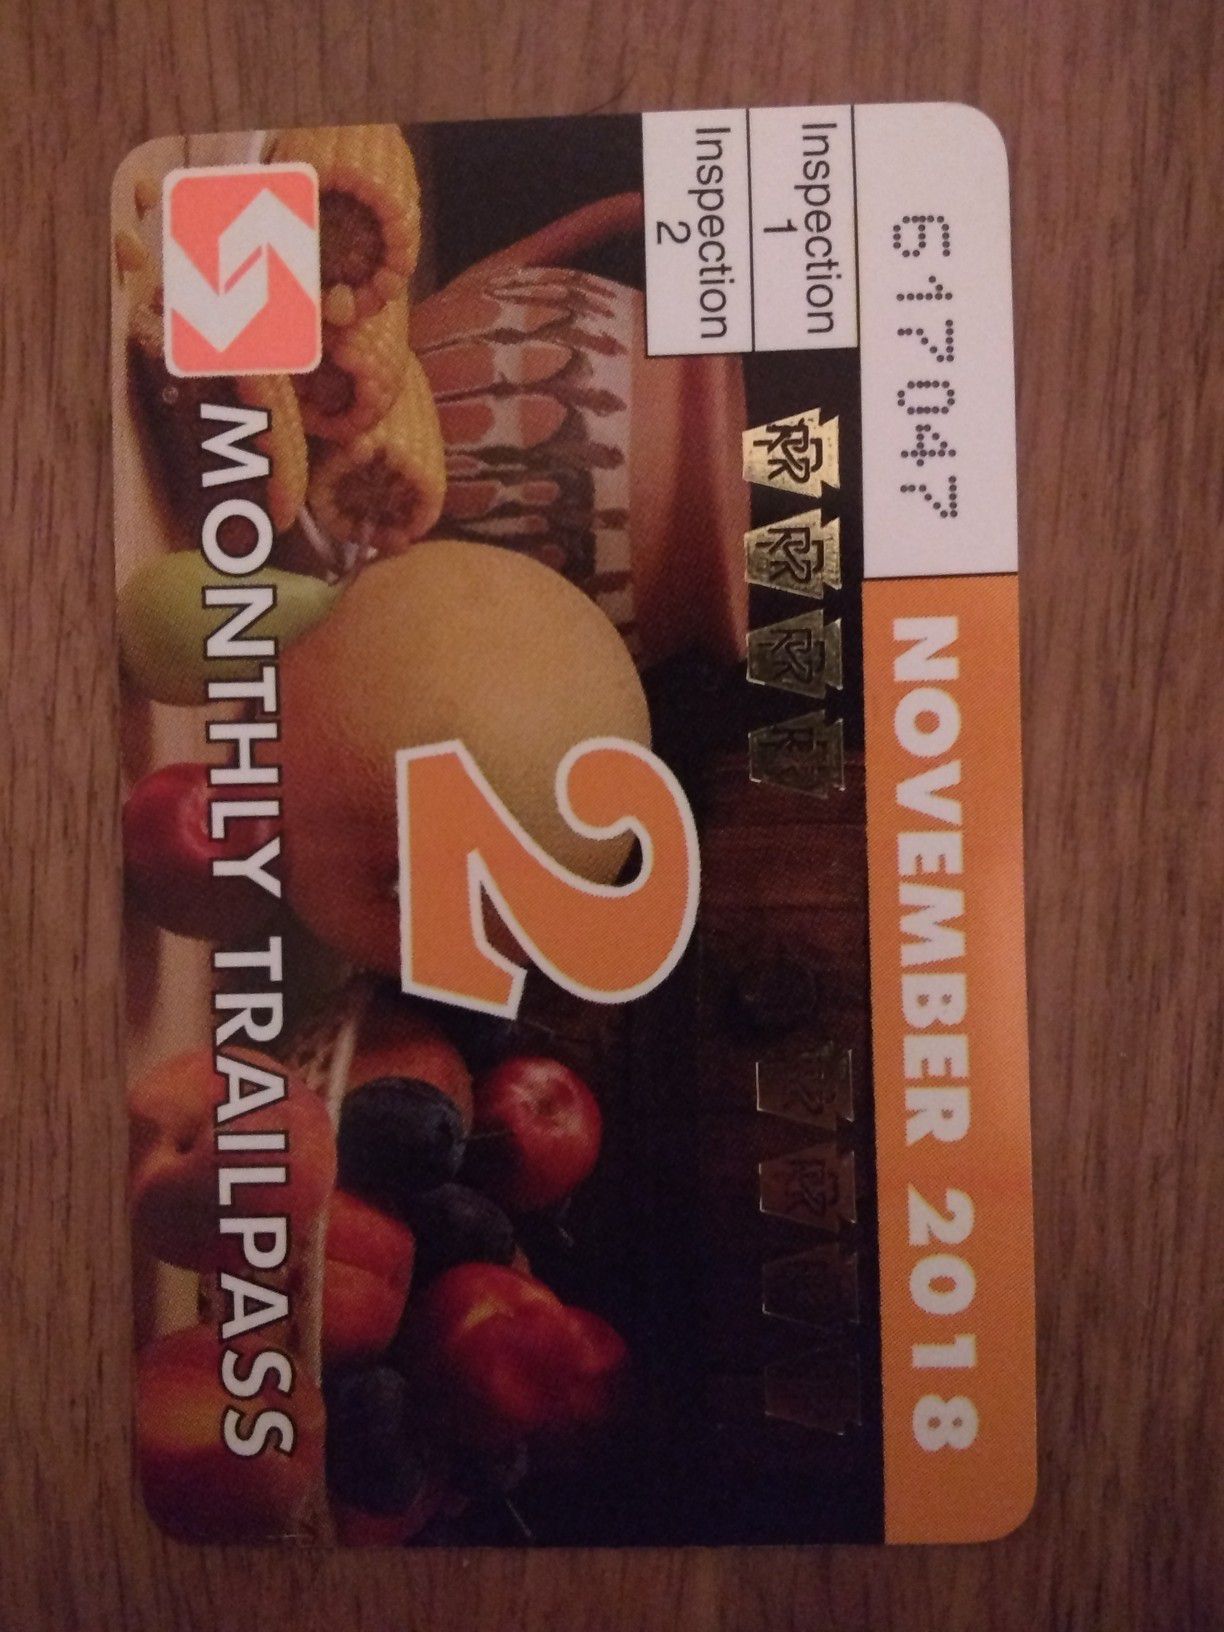 November 2018 septa monthly trail pass. Zone 2